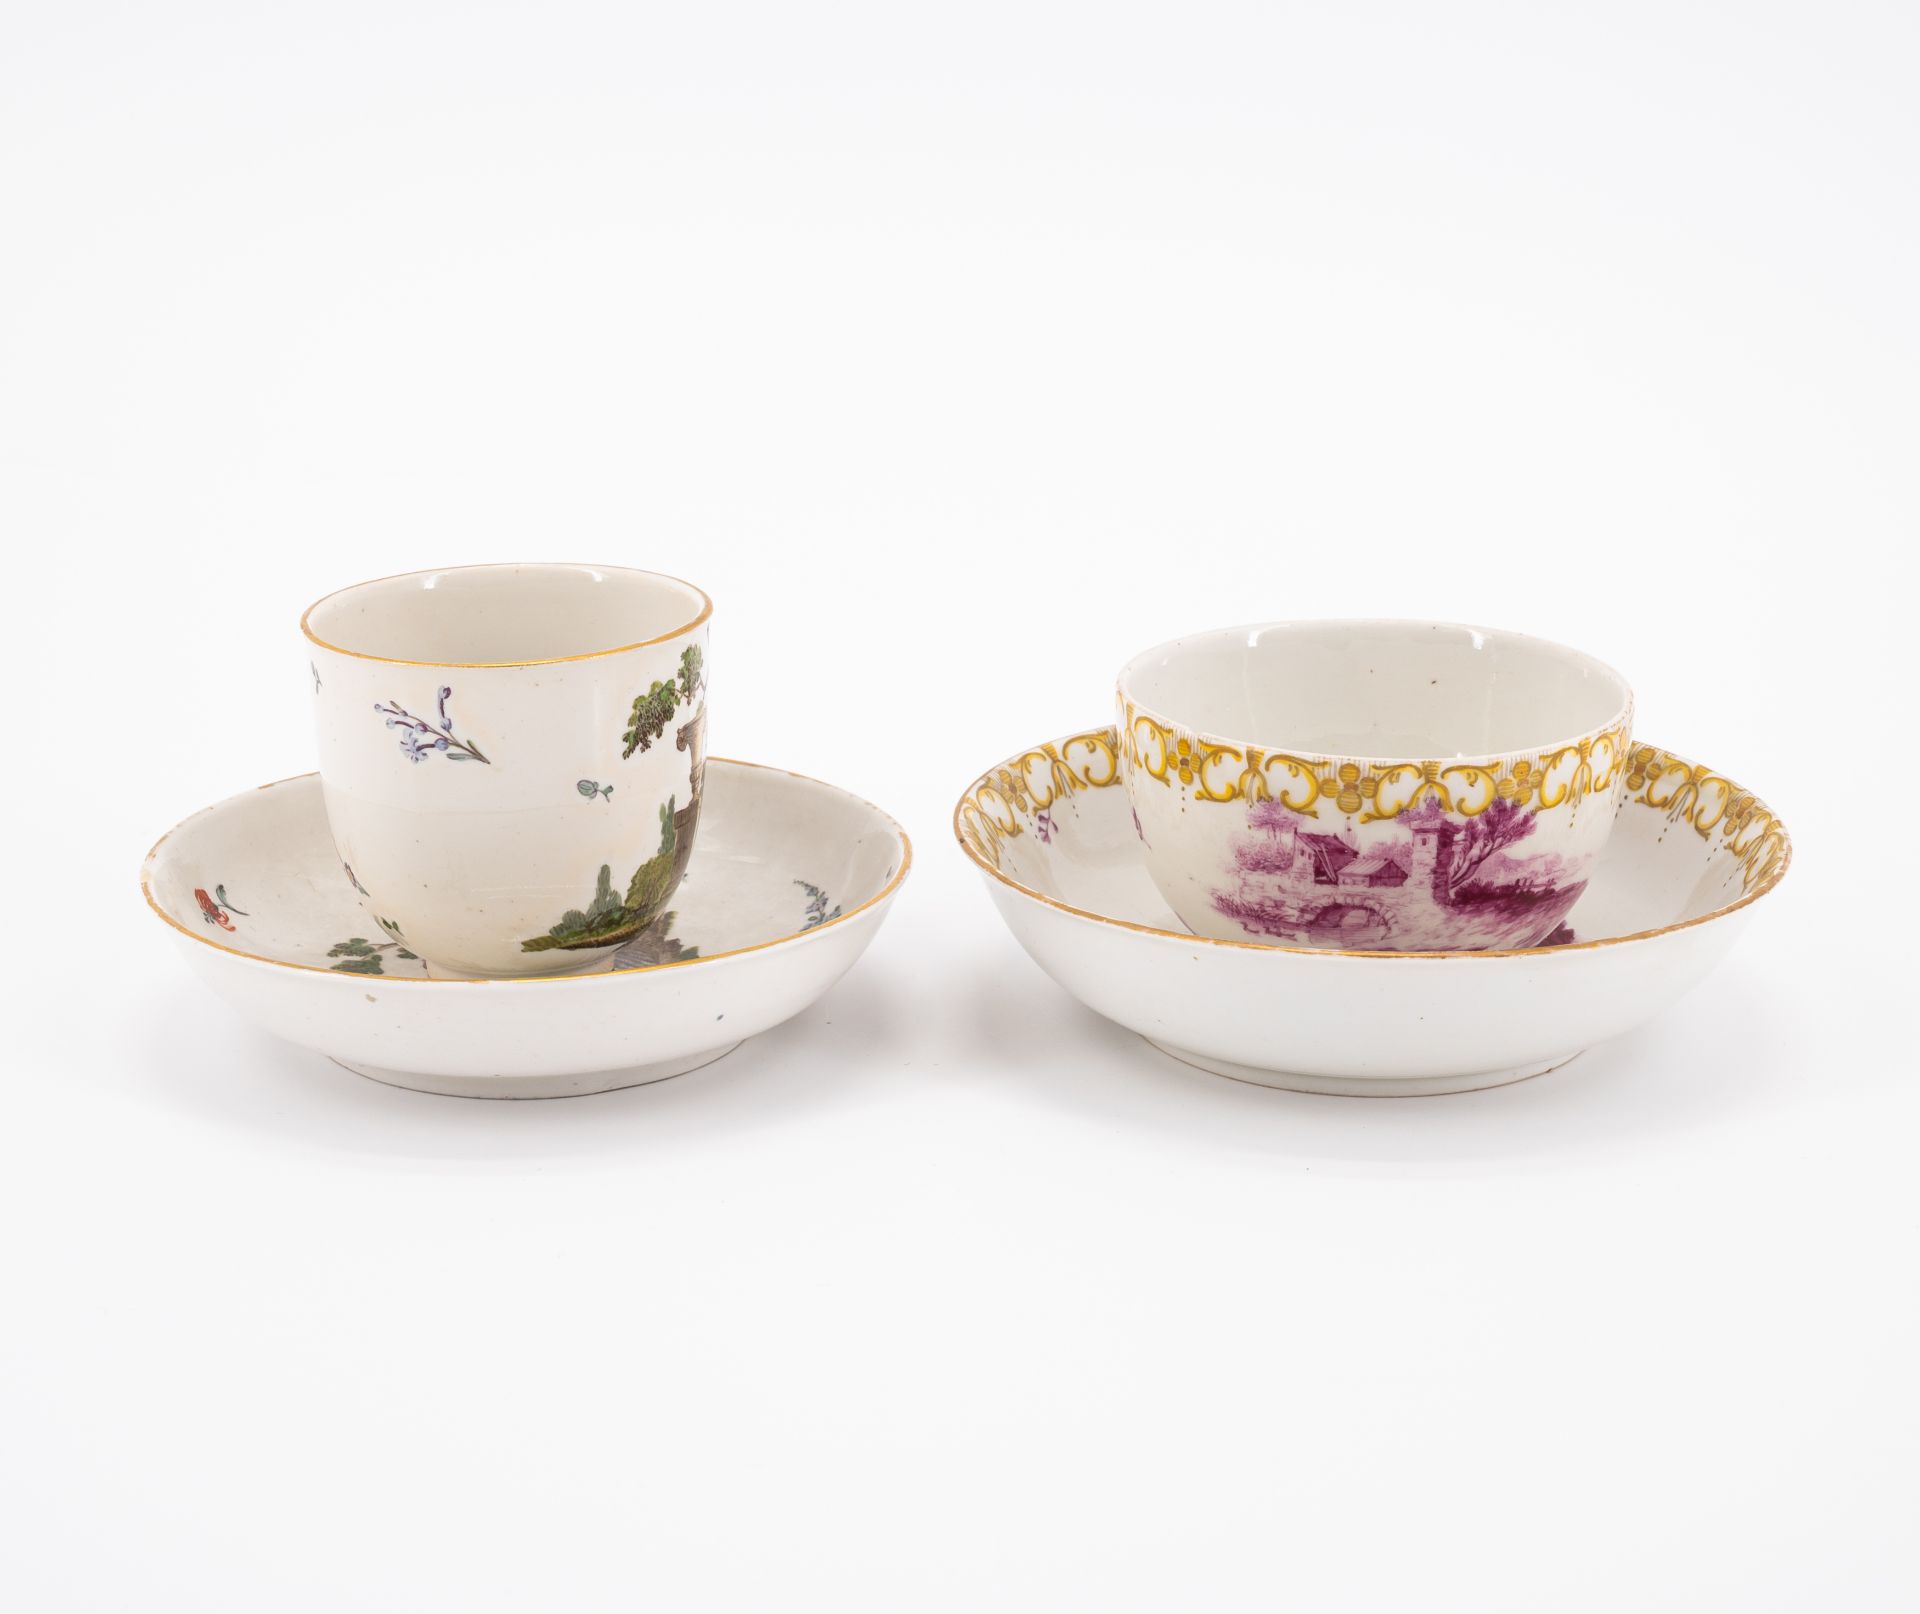 PORCELAIN SLOP BOWL, THREE CUPS AND SAUCERS WITH FIGURATIVE AND FLORAL DECOR - Image 15 of 22